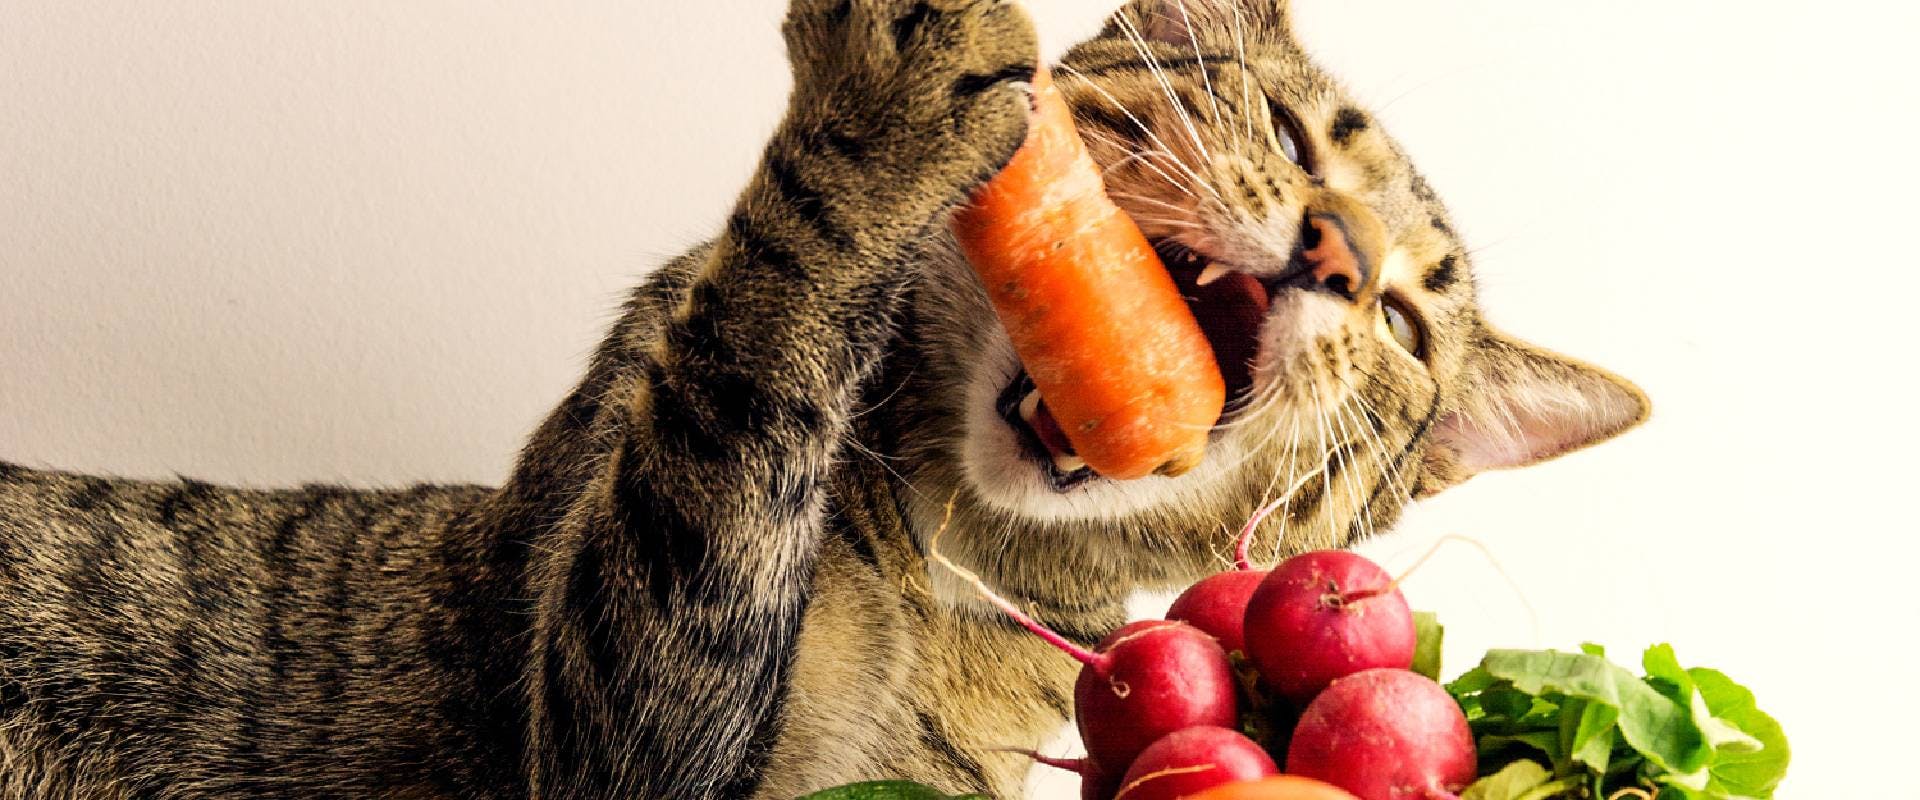 Cat gnawing on a carrot